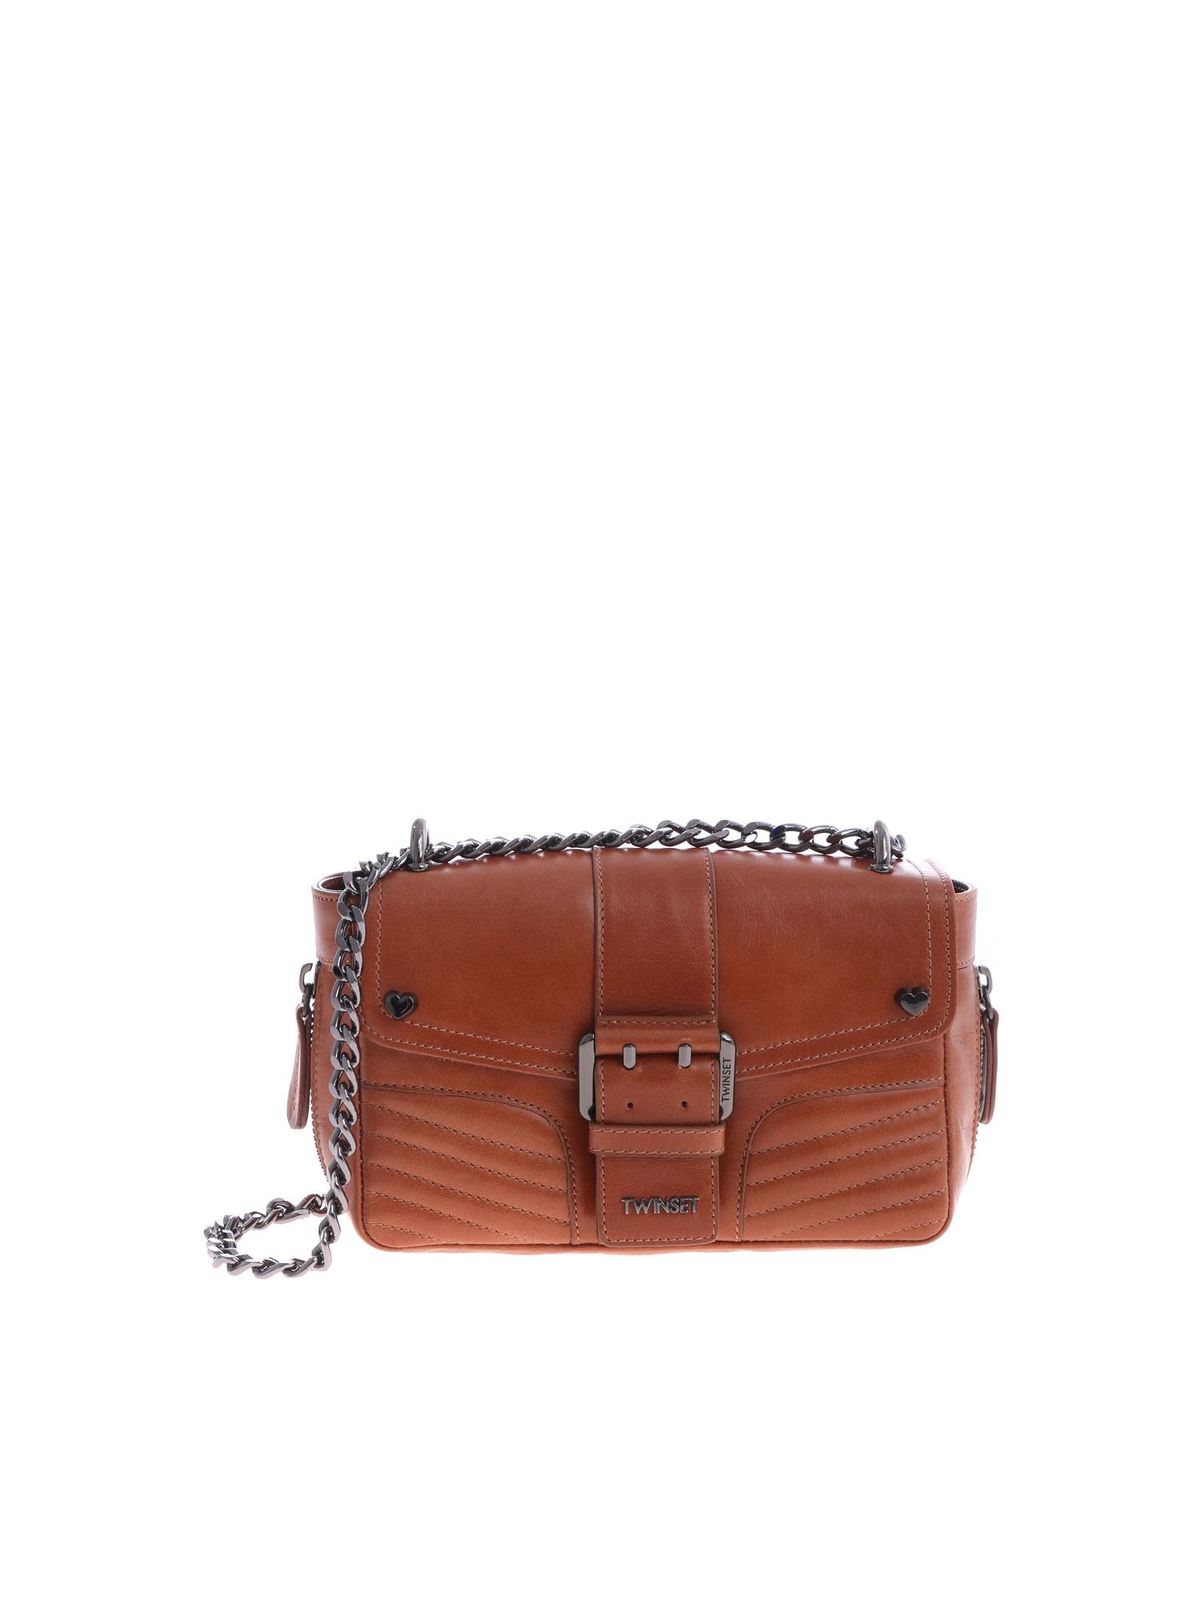 Cross body bags Twinset - Expandable shoulder bag in tan color -  TA723700057CUOIO